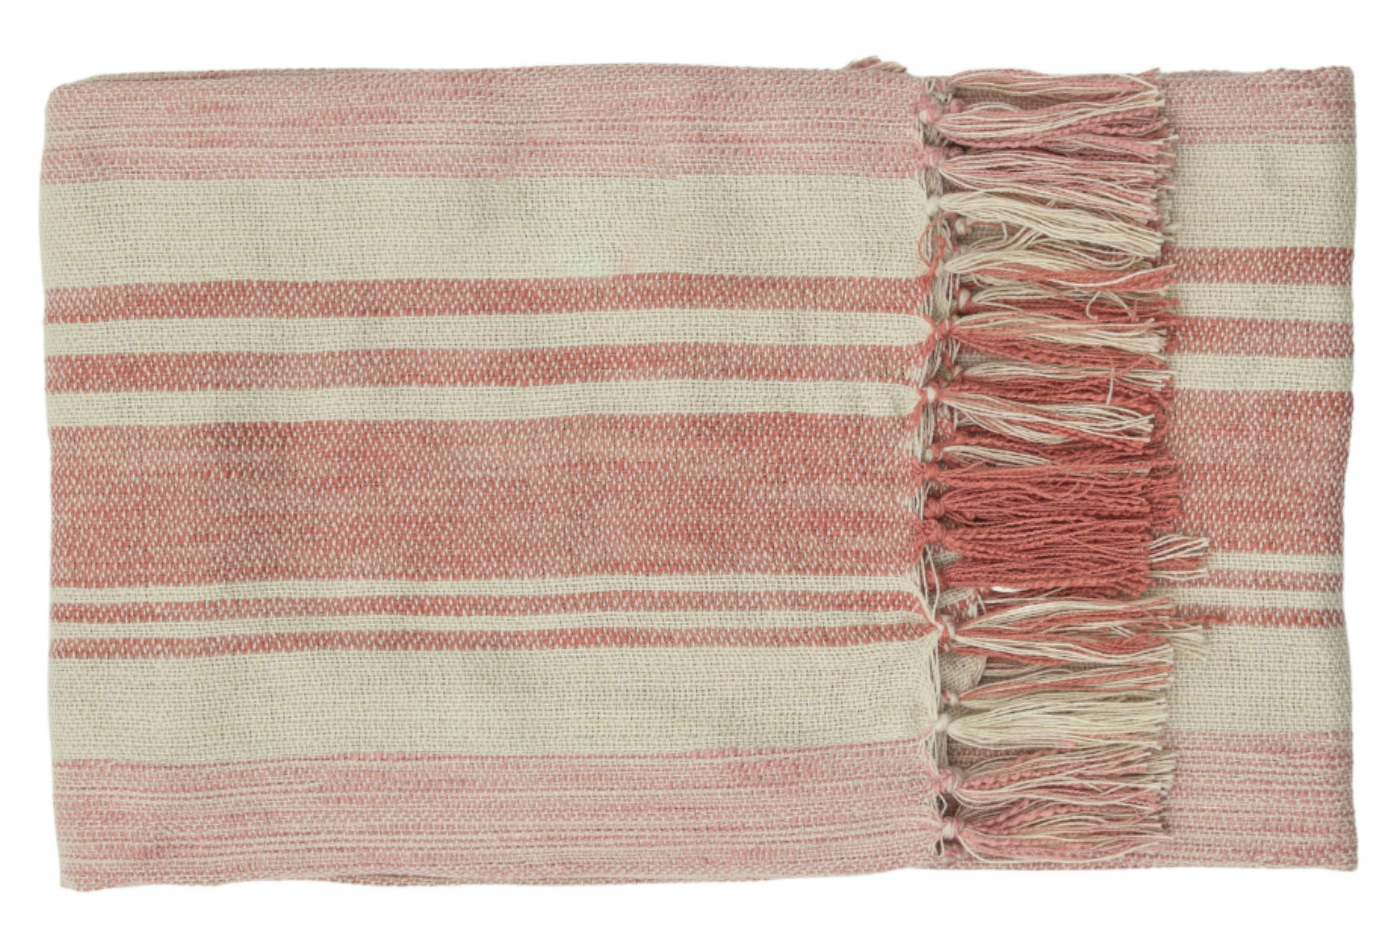 View Coral Simply Florida Stripe Woven Throw With Fringe 1700 x 1300mm information